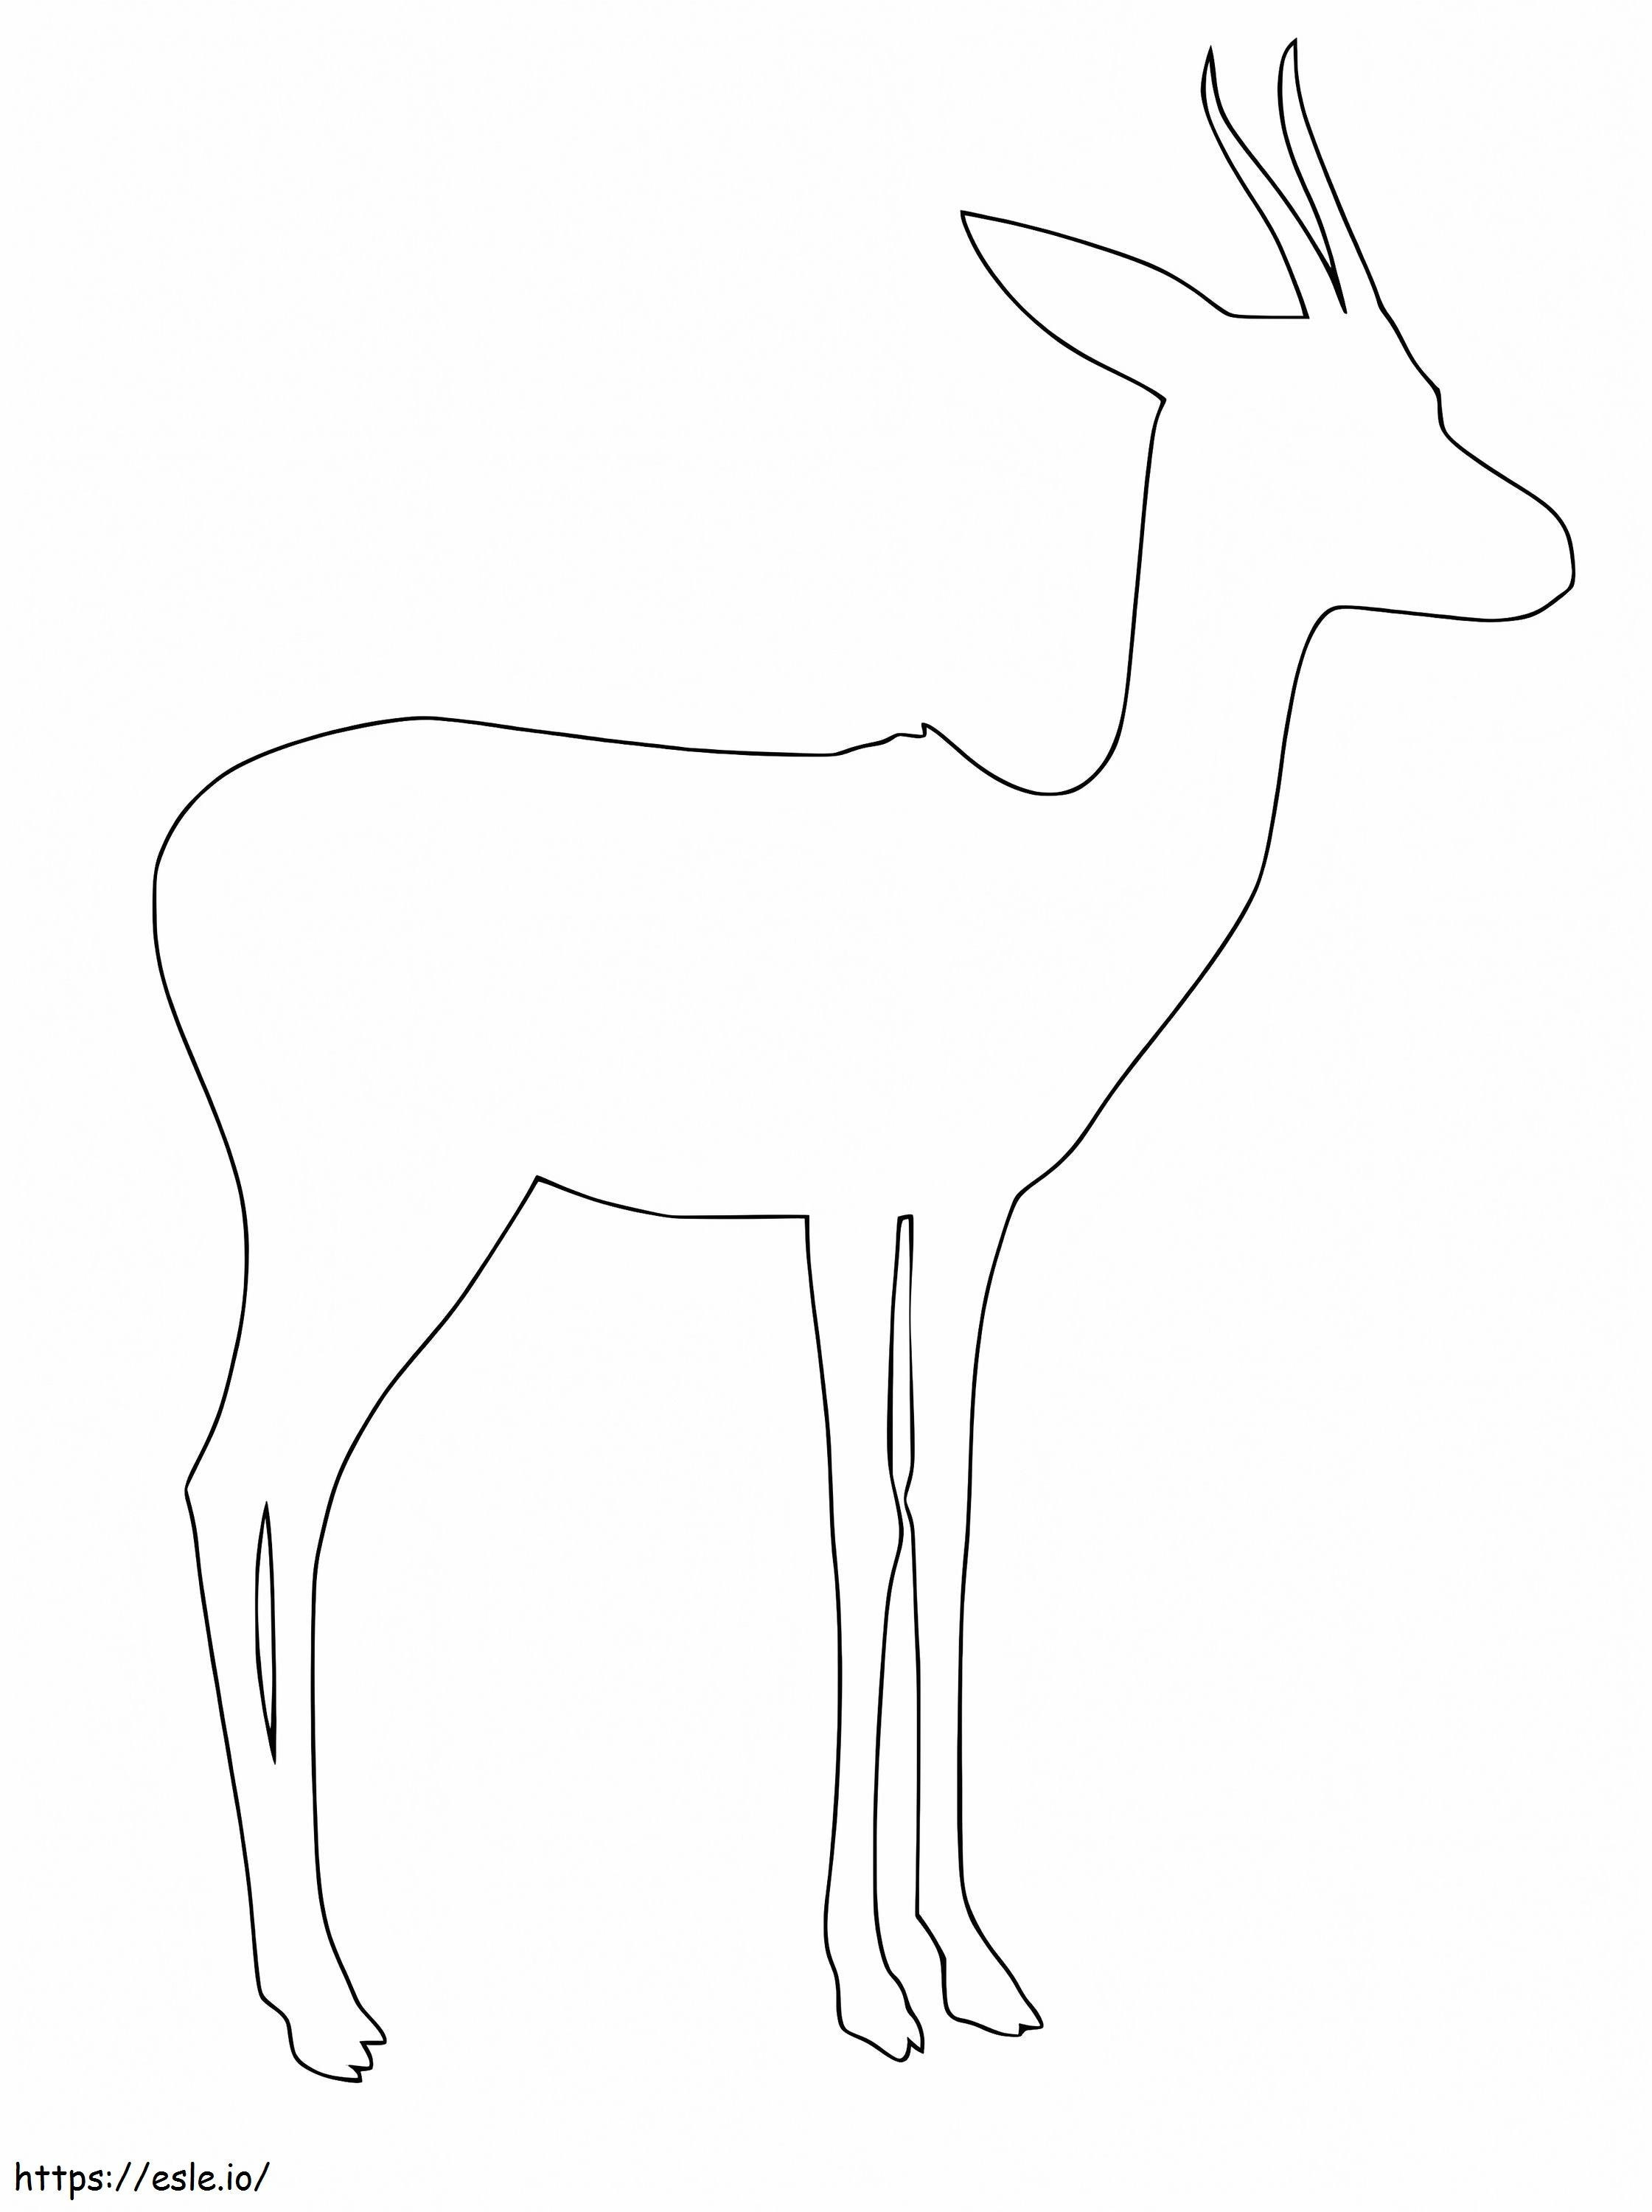 Gazelle Outline coloring page